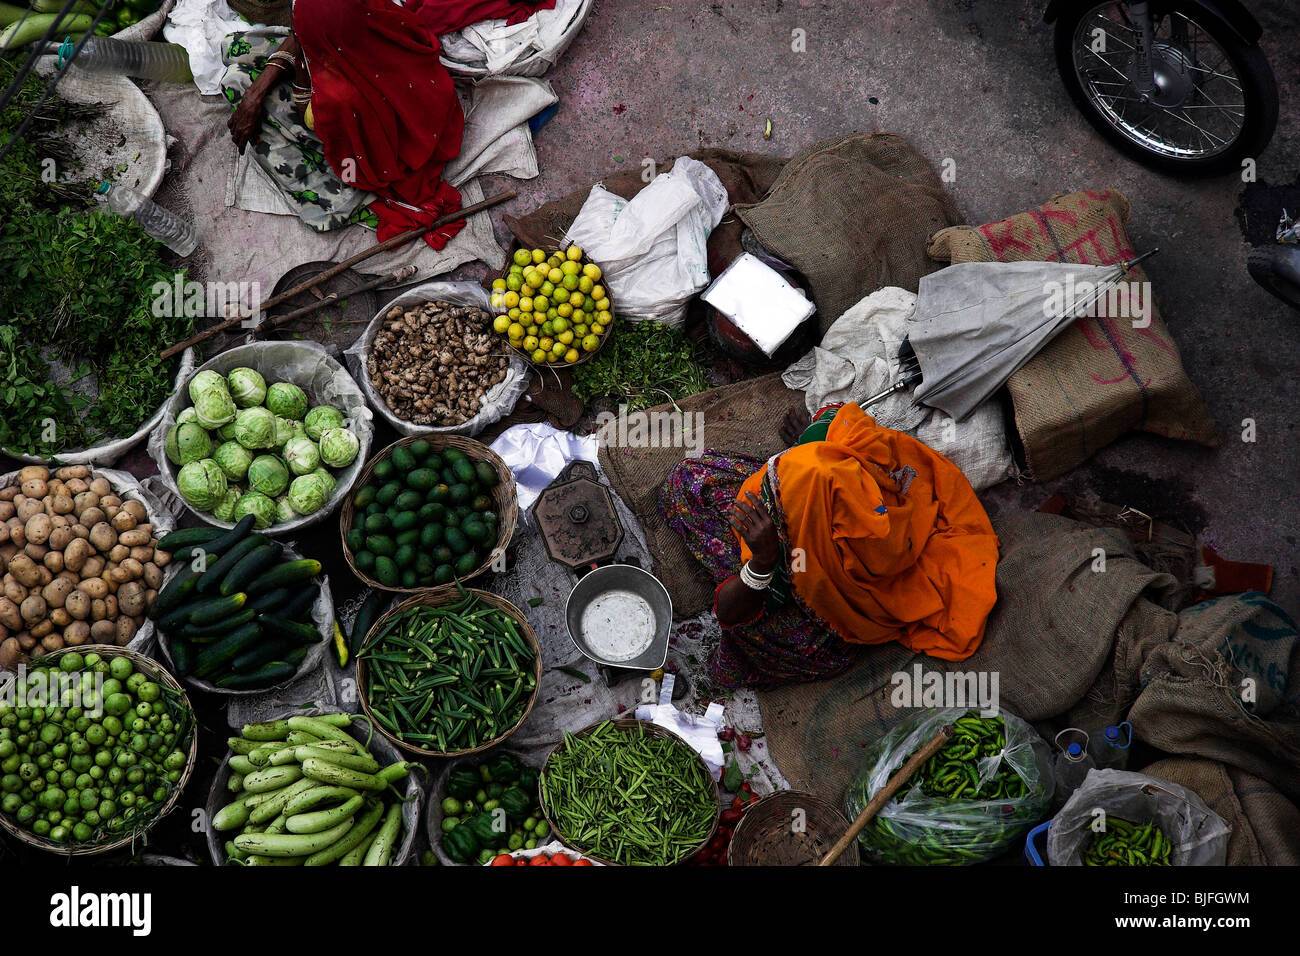 fruit and vegetable sellers in Pushka, India Stock Photo